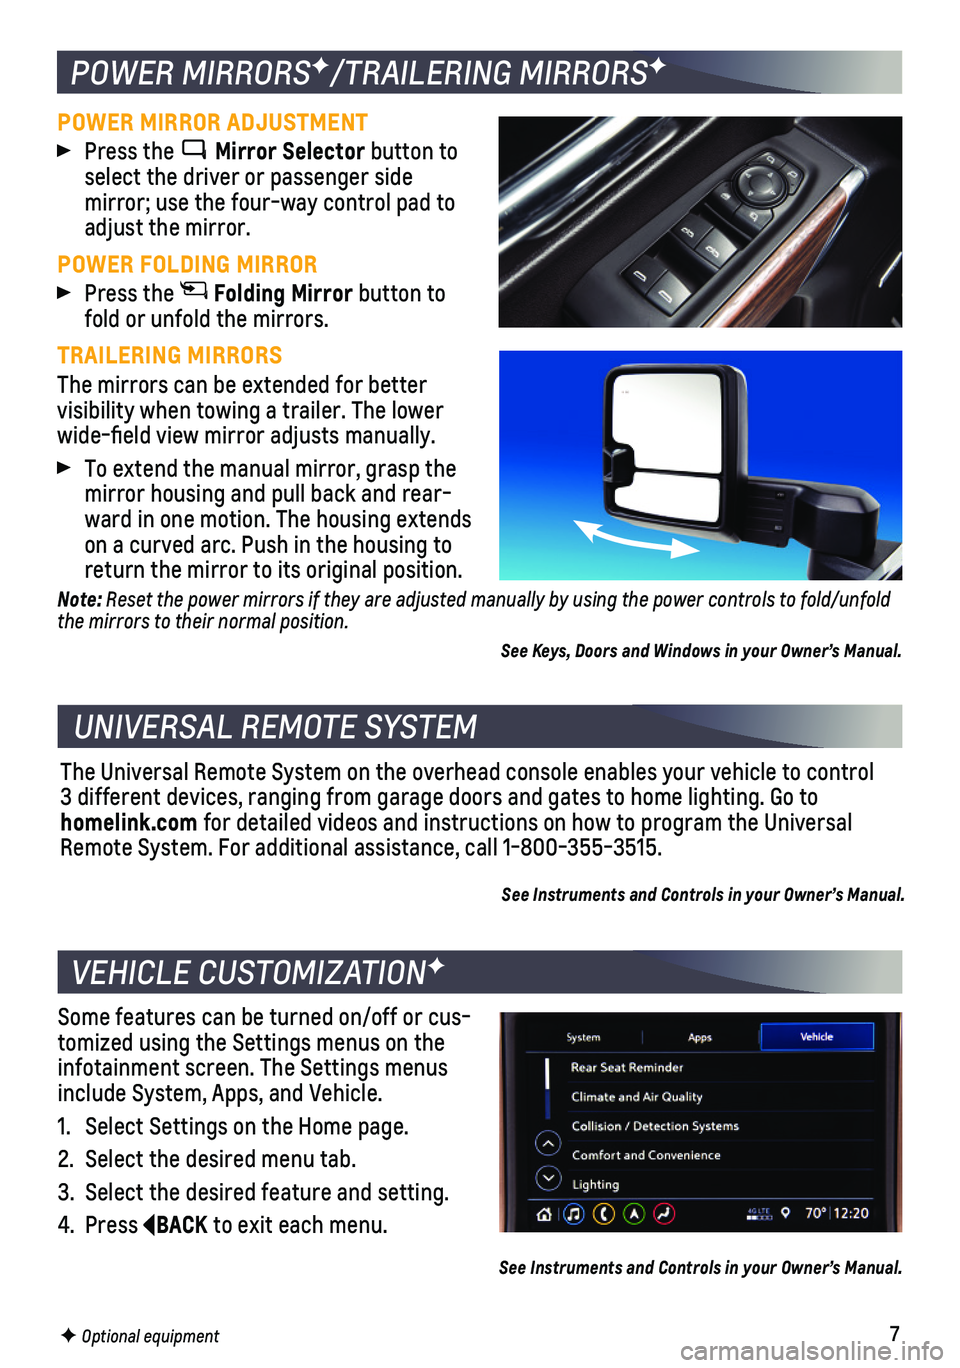 CHEVROLET SILVERADO 1500 2021  Get To Know Guide 7F Optional equipment
VEHICLE CUSTOMIZATIONF
Some features can be turned on/off or cus-tomized using the Settings menus on the infotainment screen. The Settings menus include System, Apps, and Vehicle